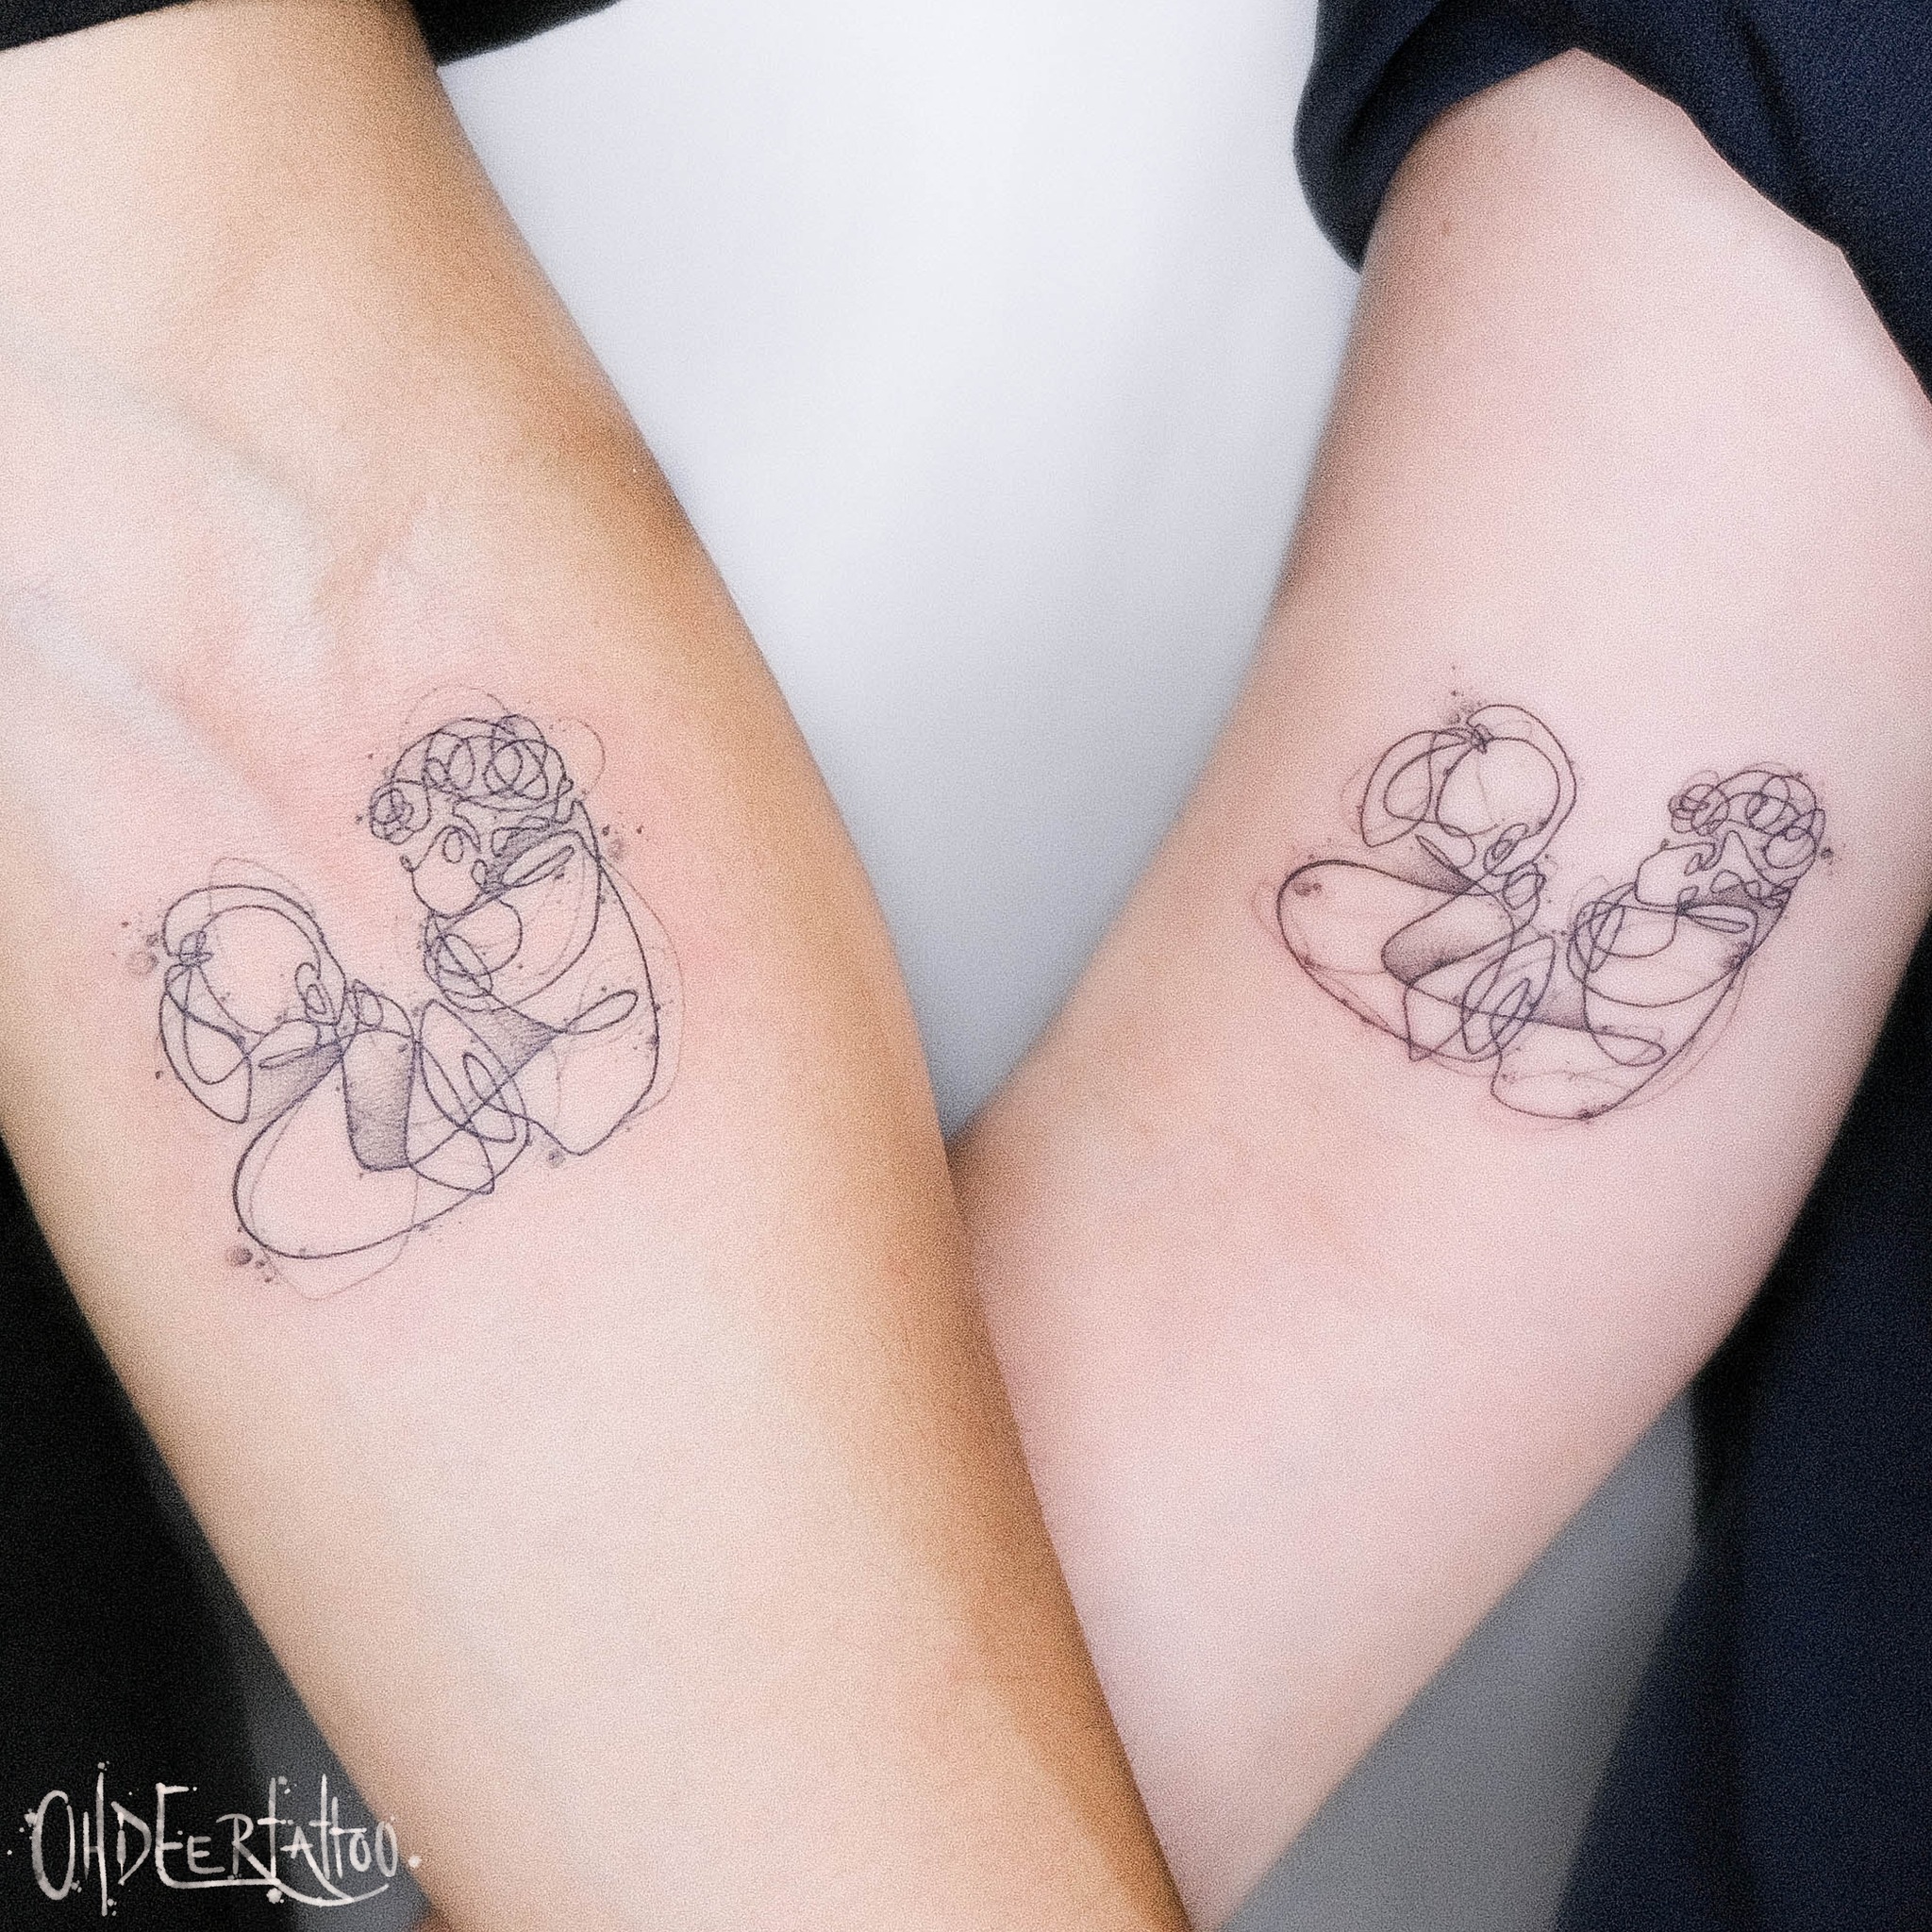 Deer and Doe tattoo by https://jessicamisfit.deviantart.com on @DeviantArt  | Couple tattoos, Couple tattoos unique, Doe tattoo